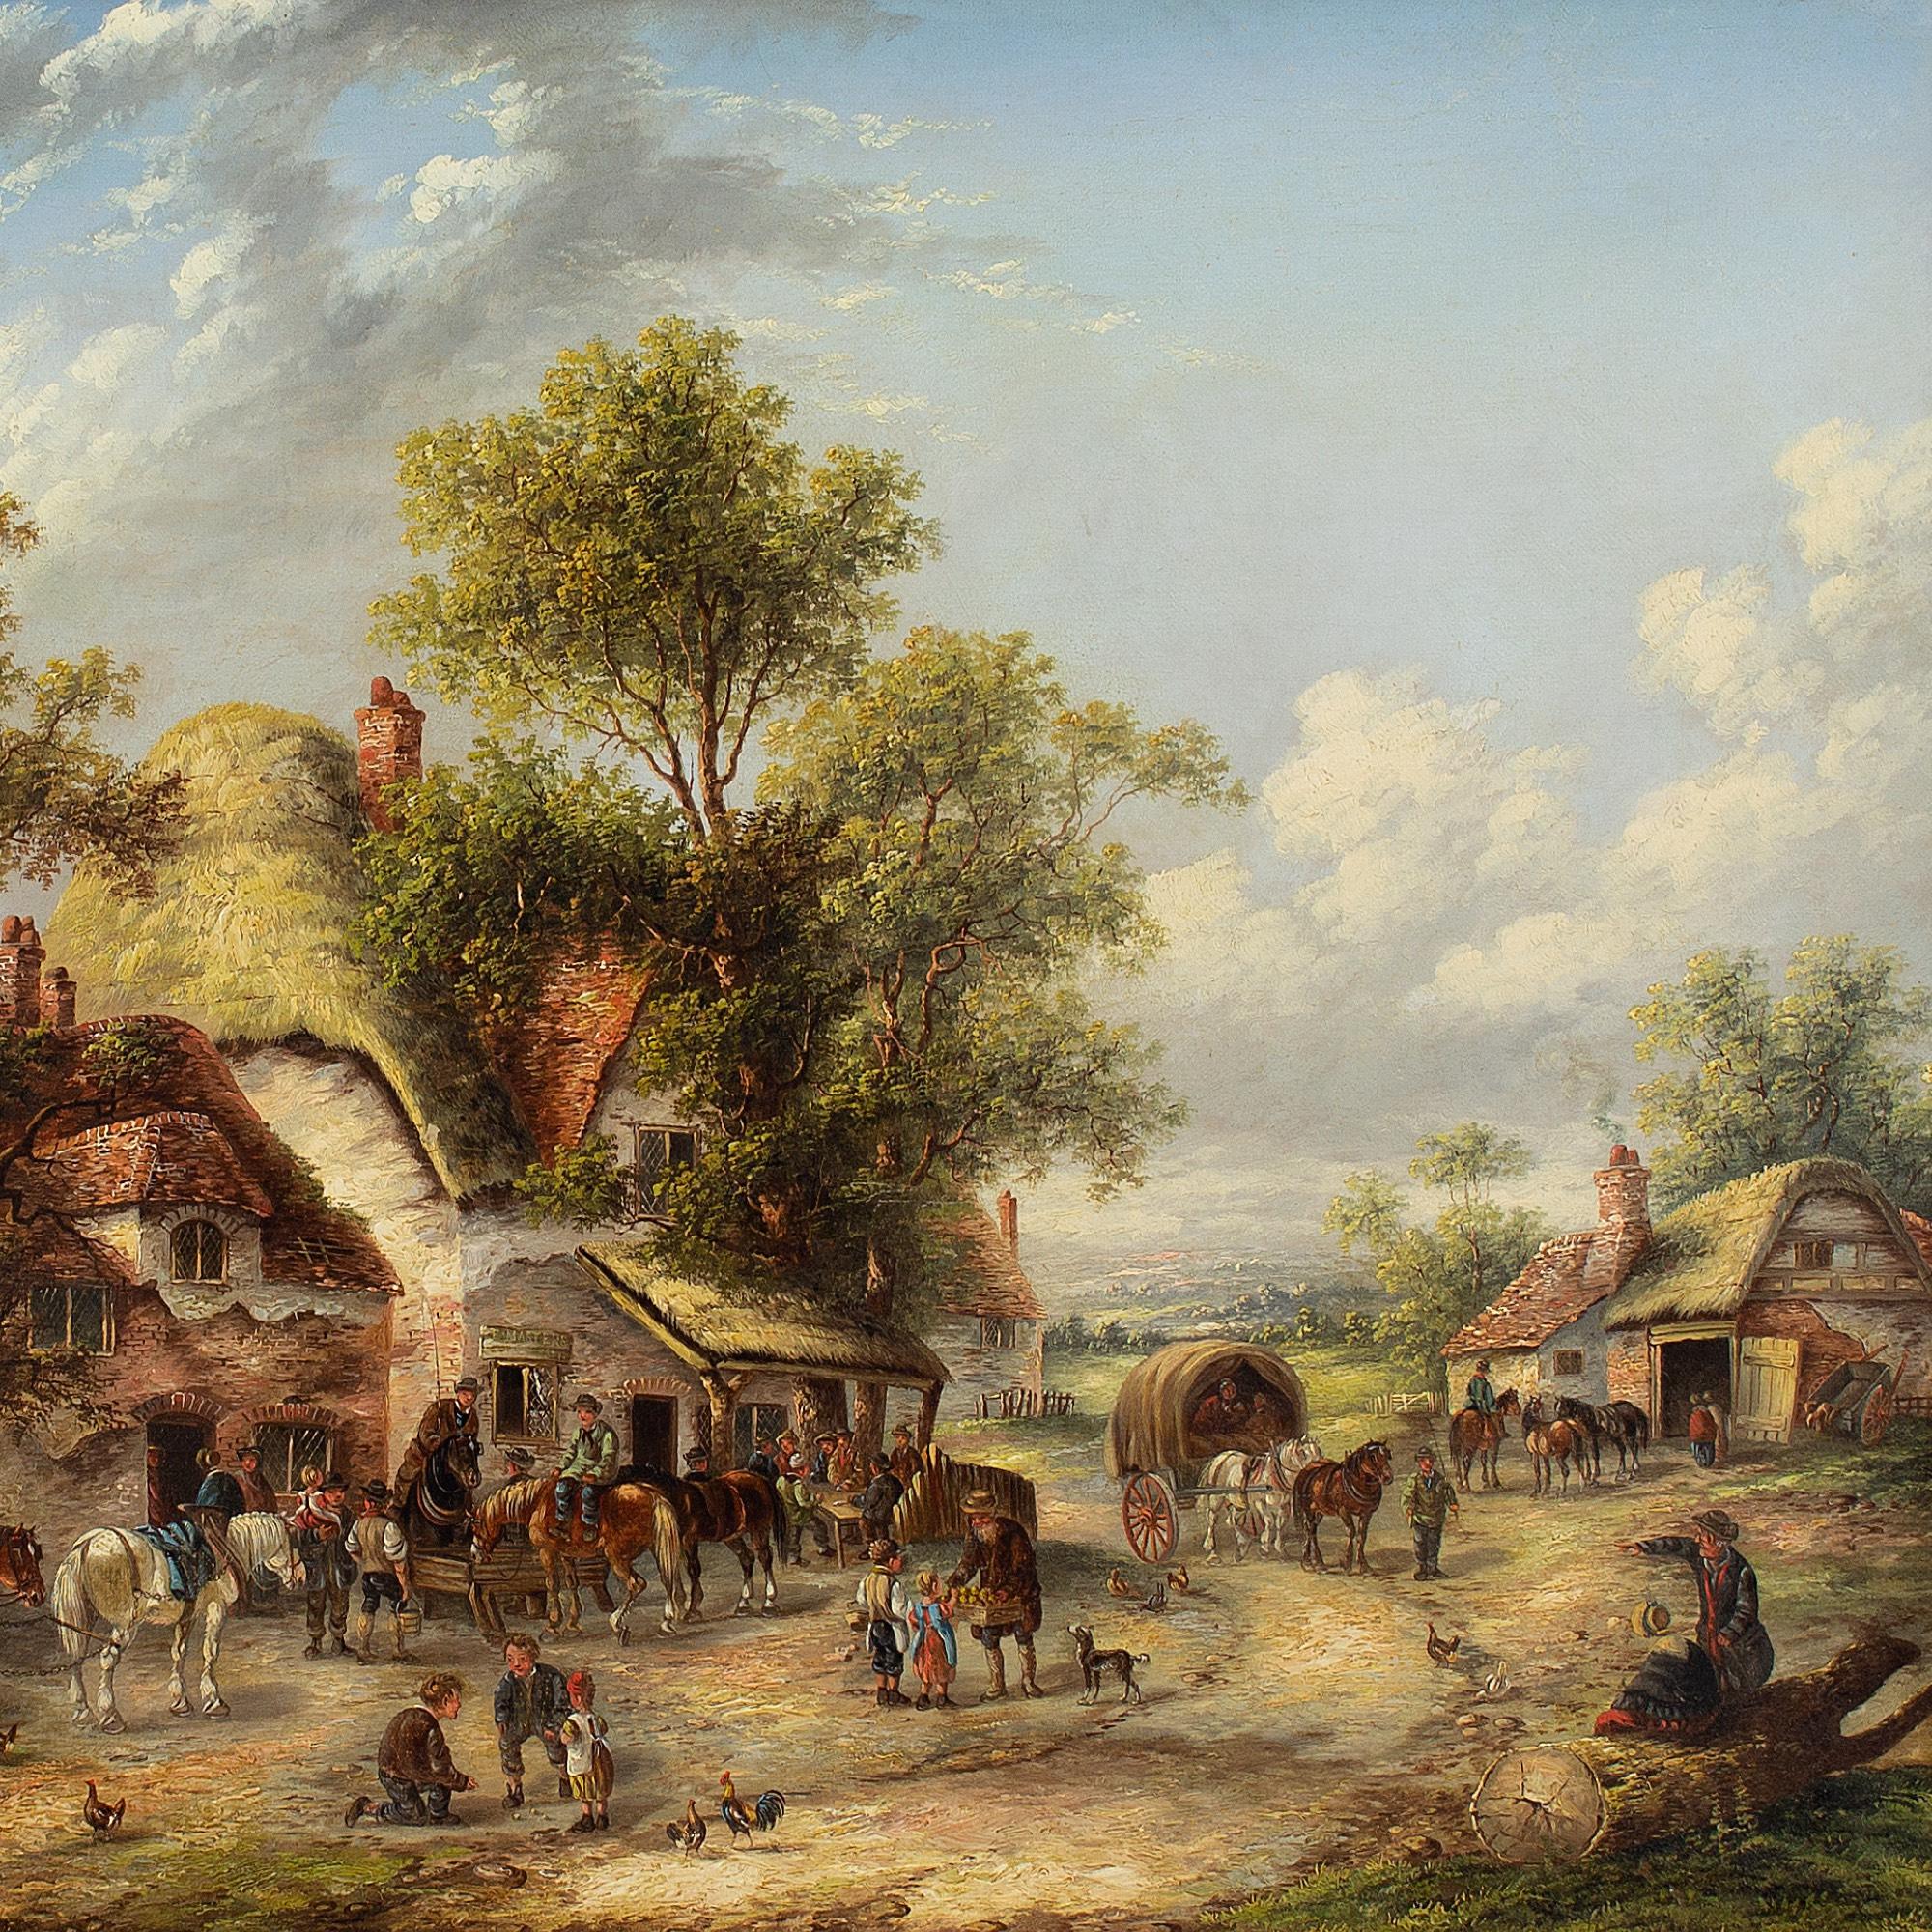 This charming oil painting by British artist Edwin Masters (act. 1862-1877) depicts a busy village scene with several thatched cottages and figures. It’s abundant with life and each character seems to tell their own story.

The scene is centred